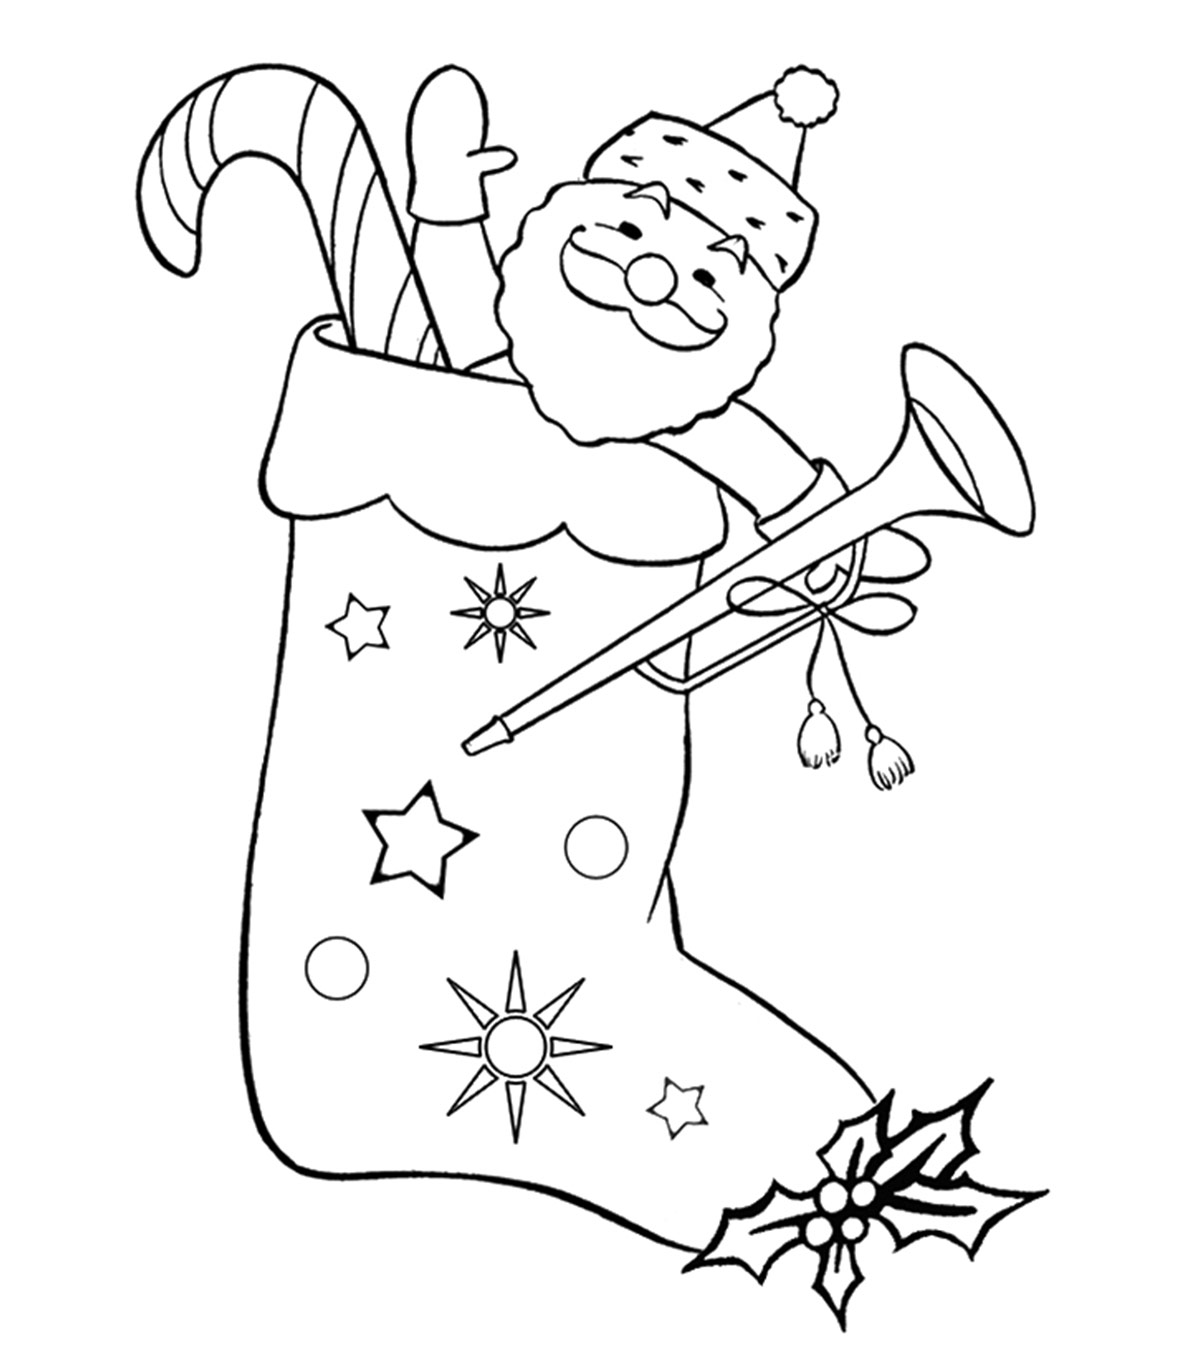 25 Lovely ‘Christmas Stocking’ Coloring Pages For Your Little Ones